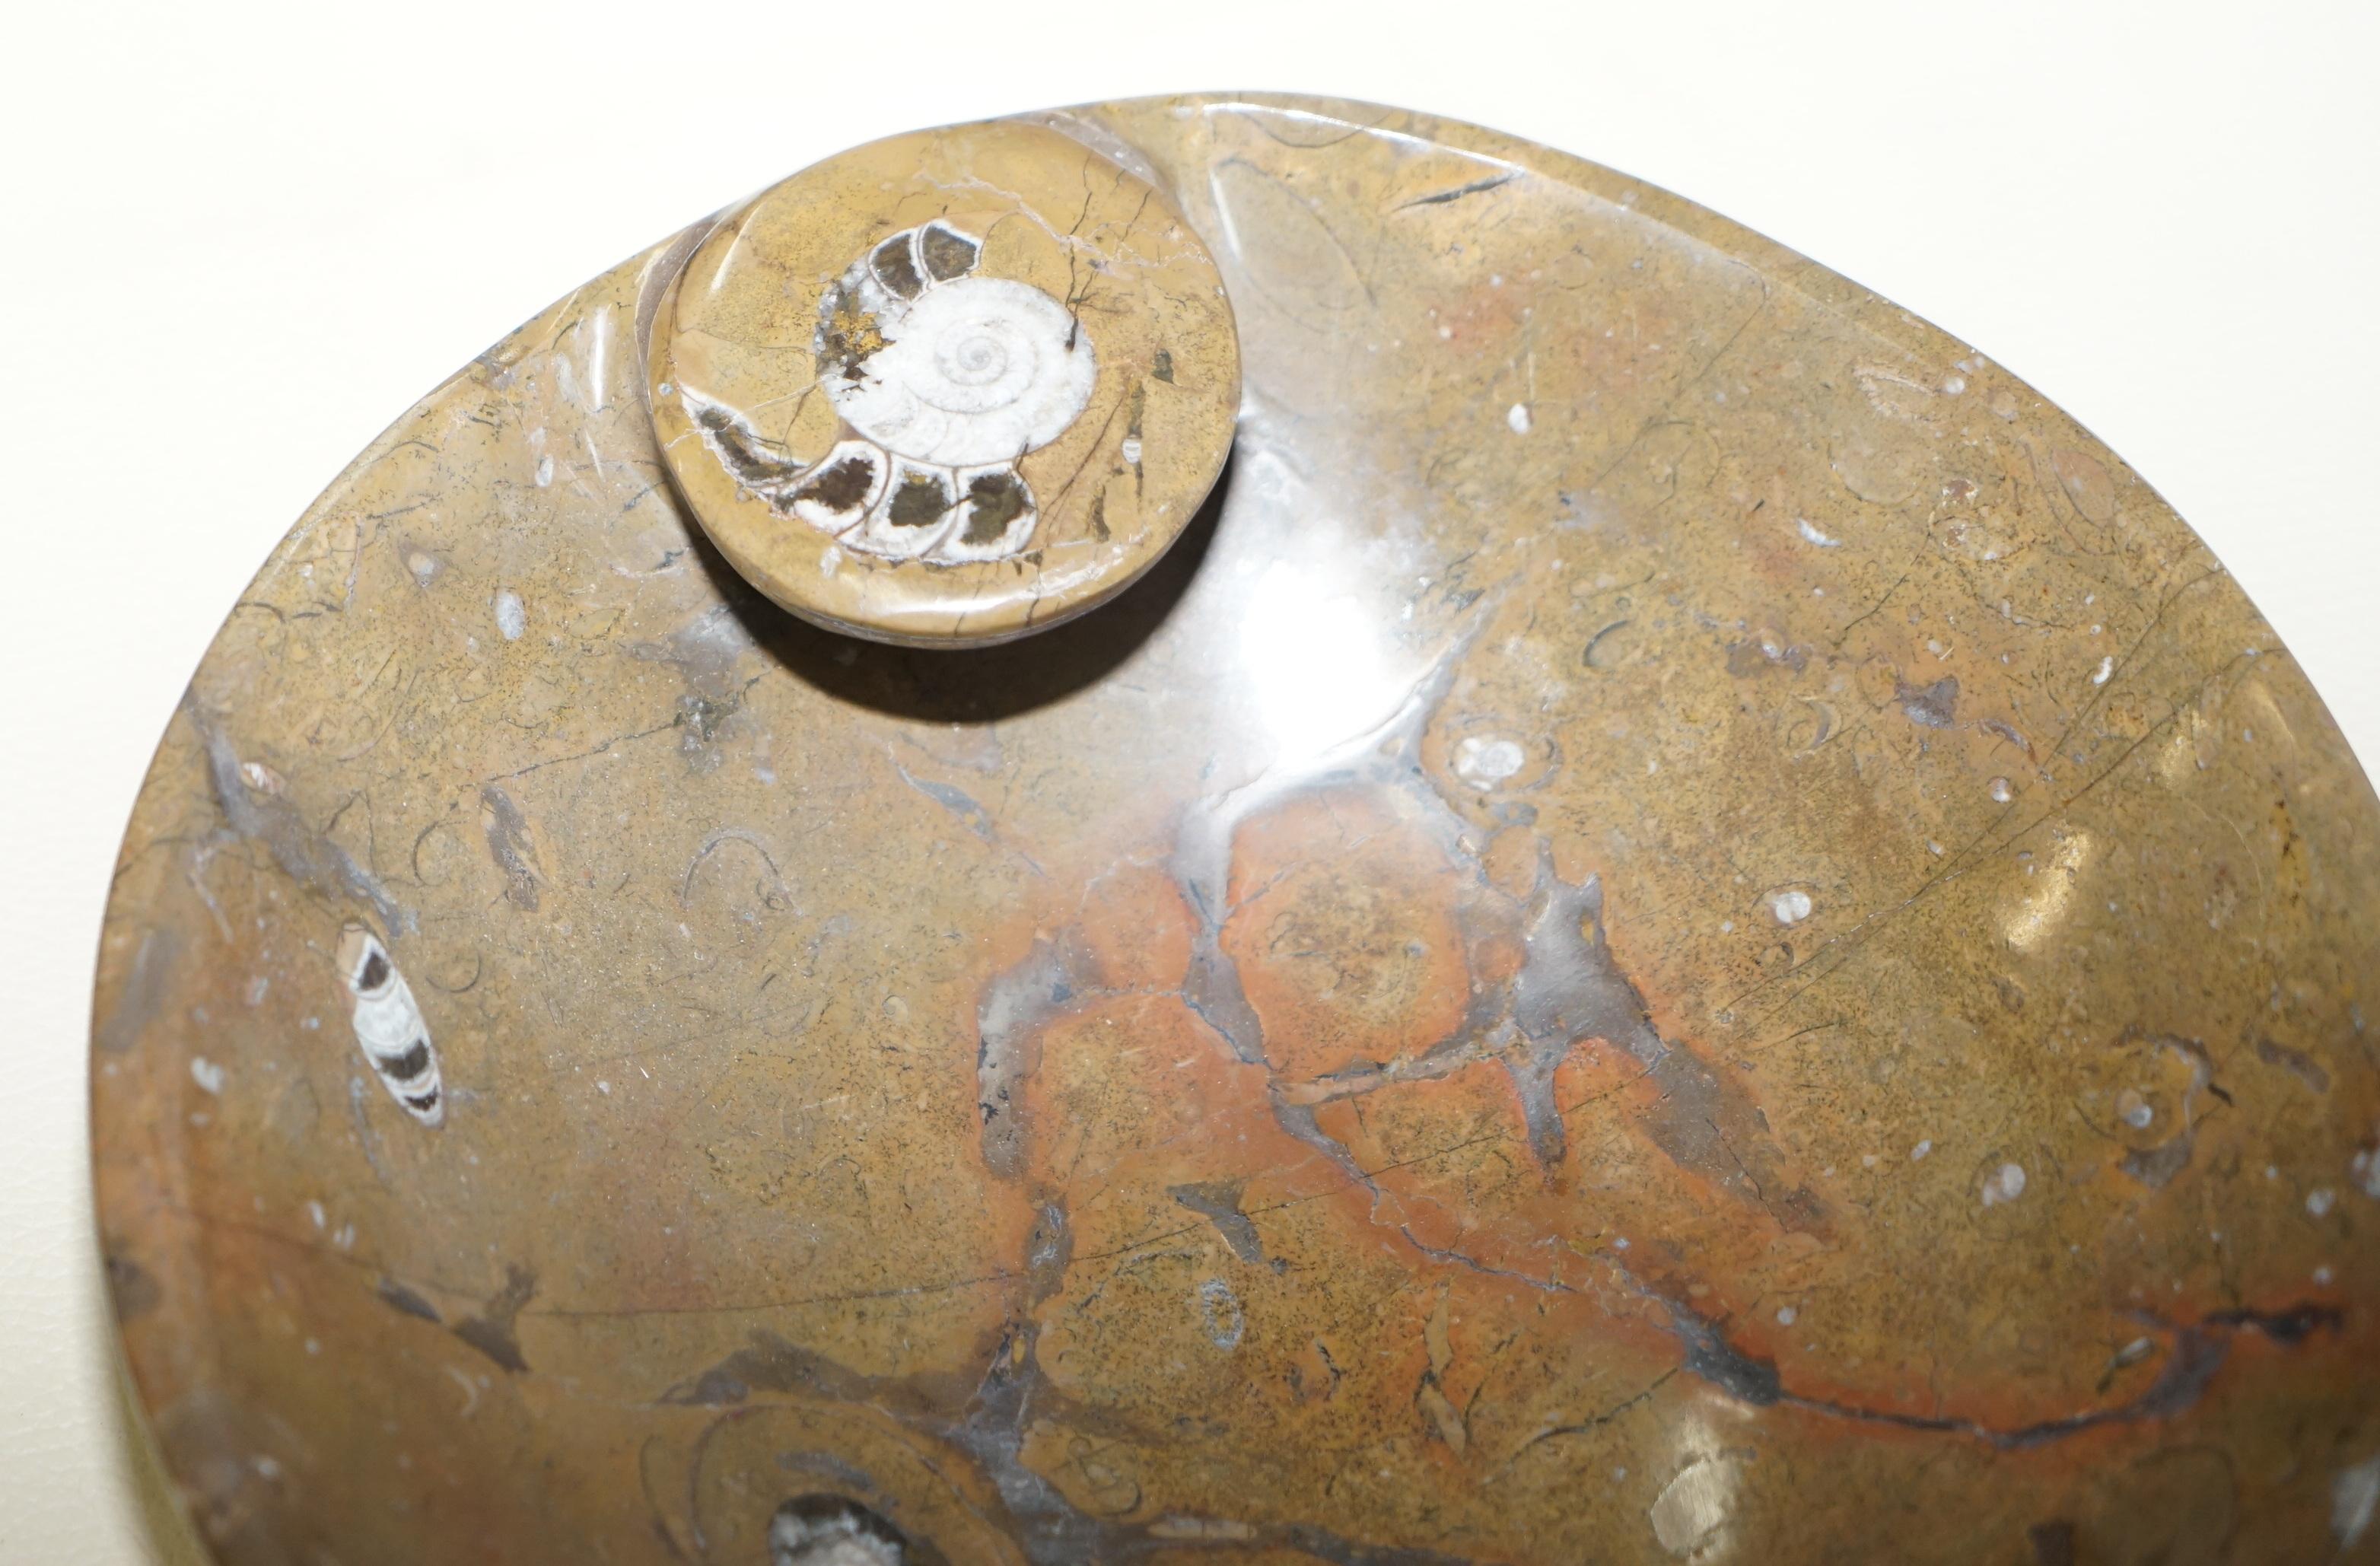 18th Century and Earlier 1 of 4 Very Rare Moroccan Ammonite Atlas Mountains Fossil Bowls Marble Finish For Sale